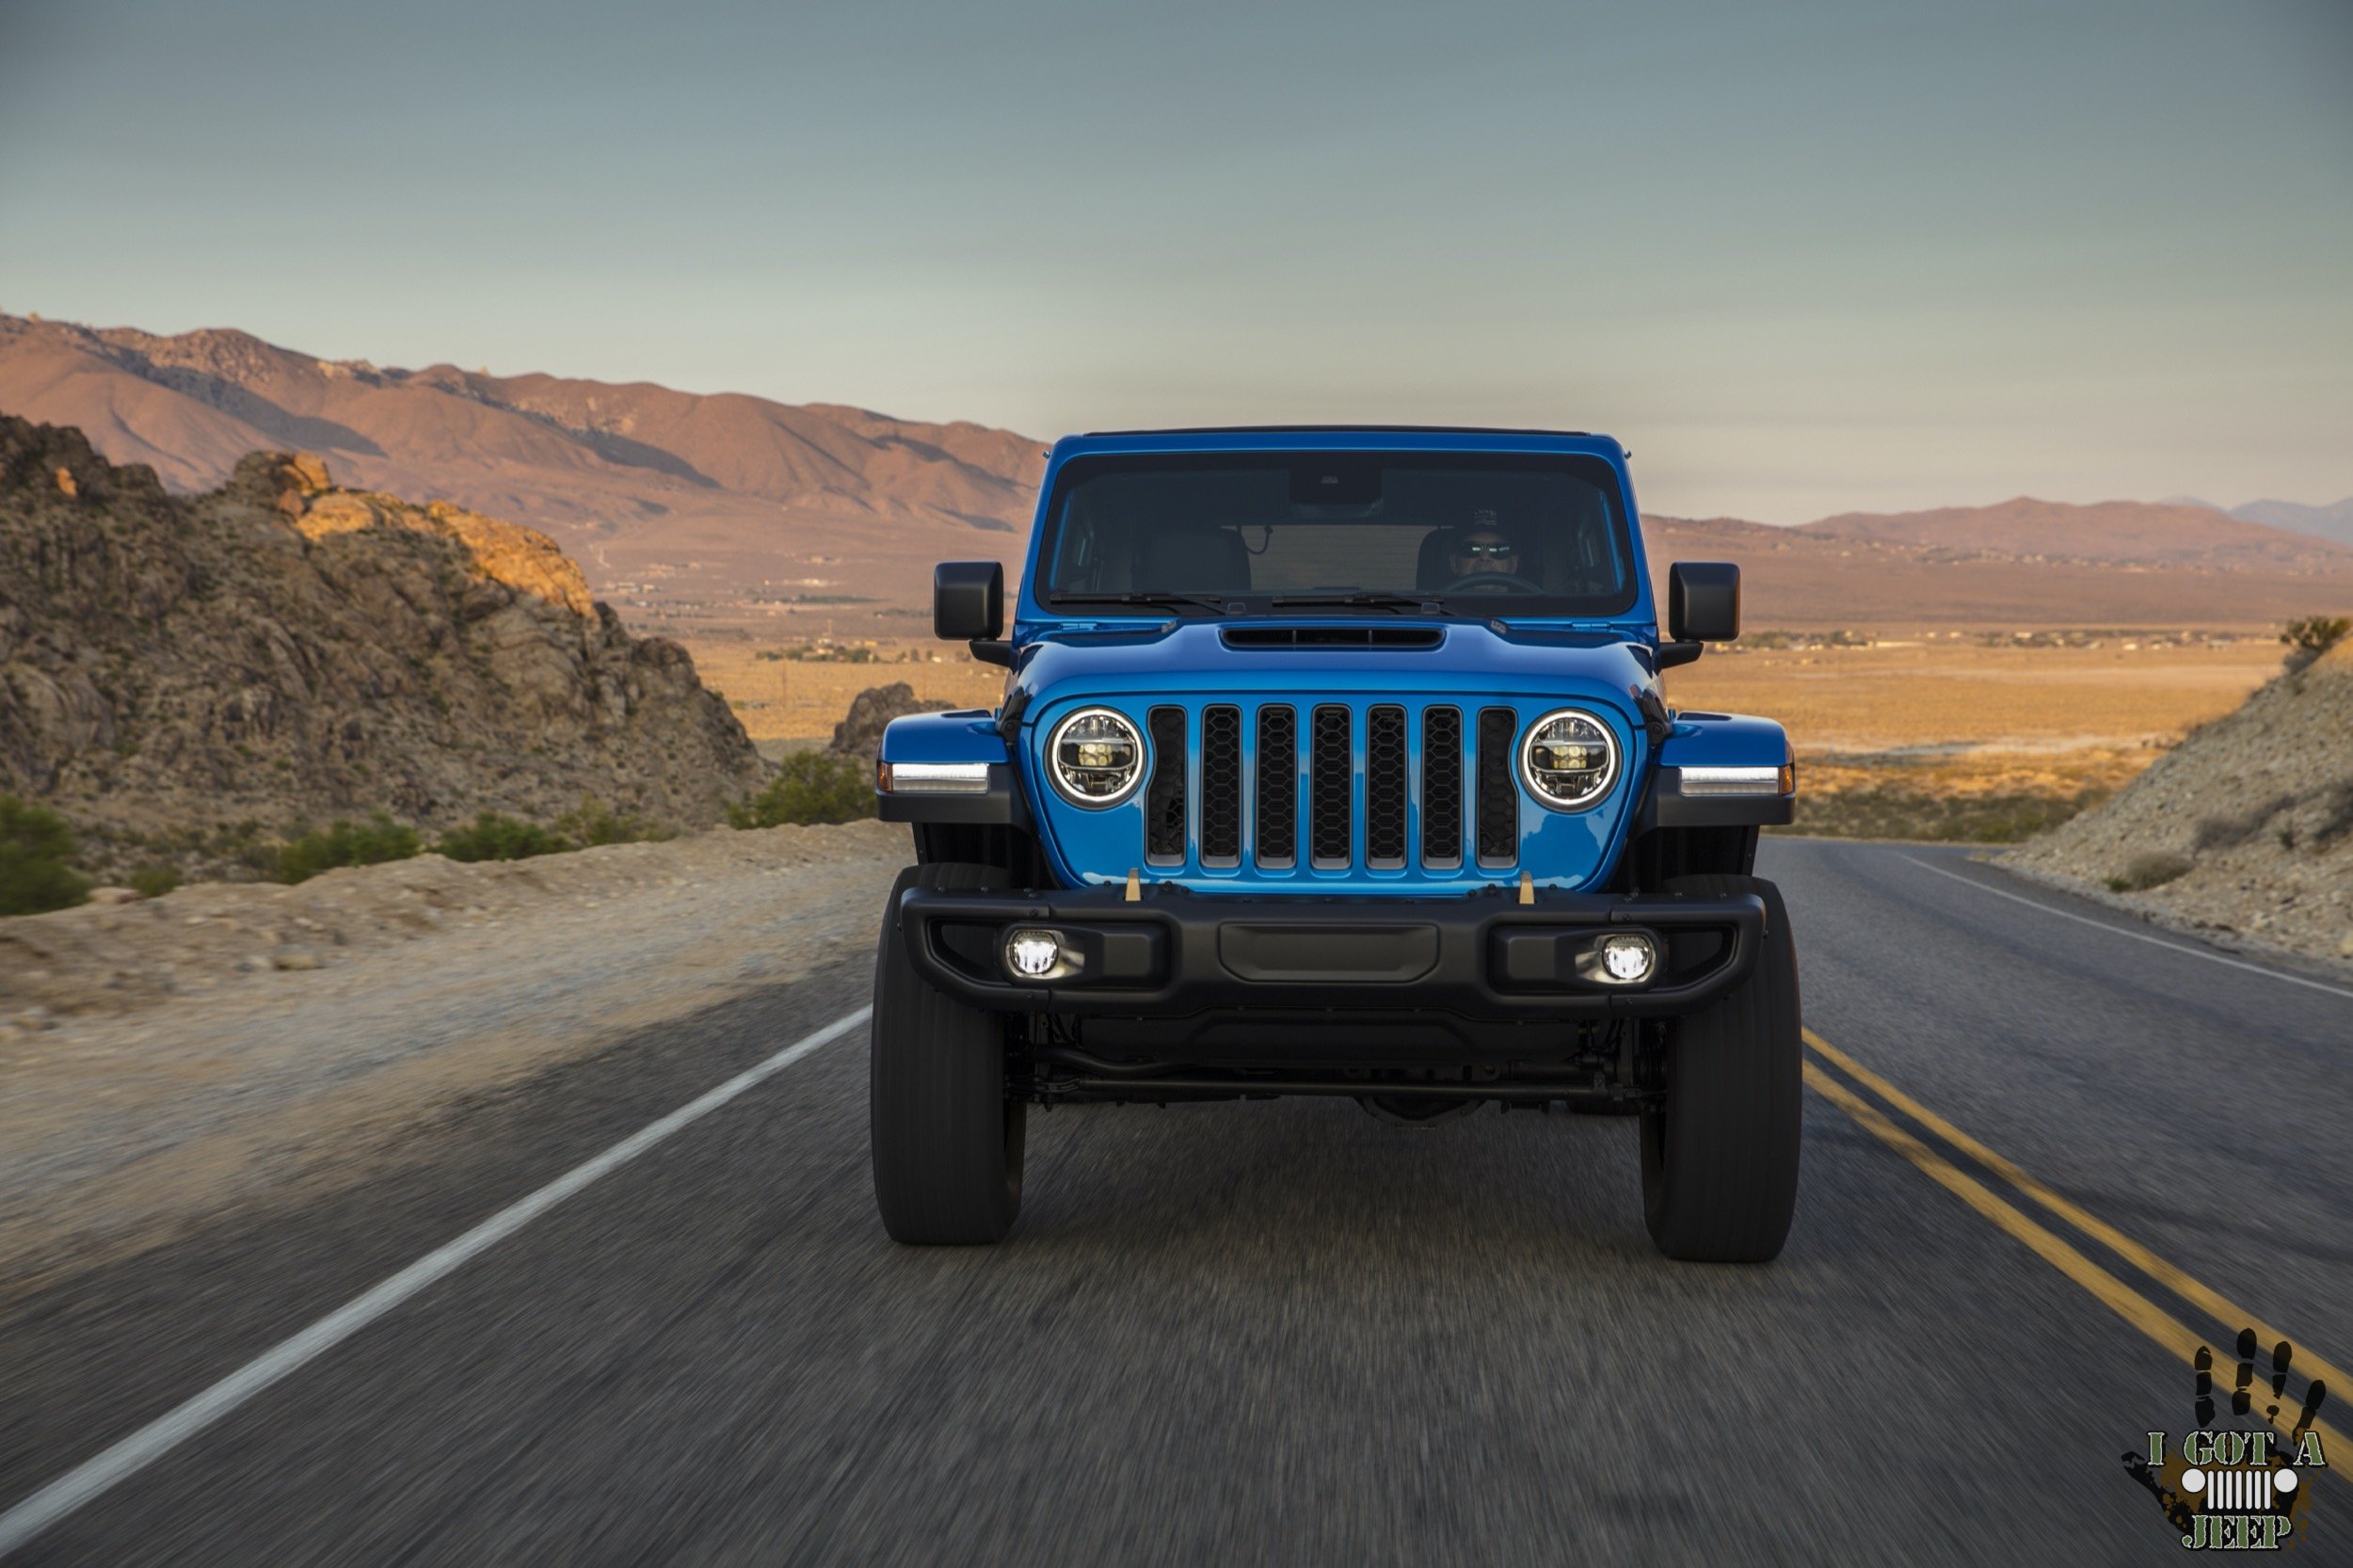 Front view of the new 2021 392 Wrangler